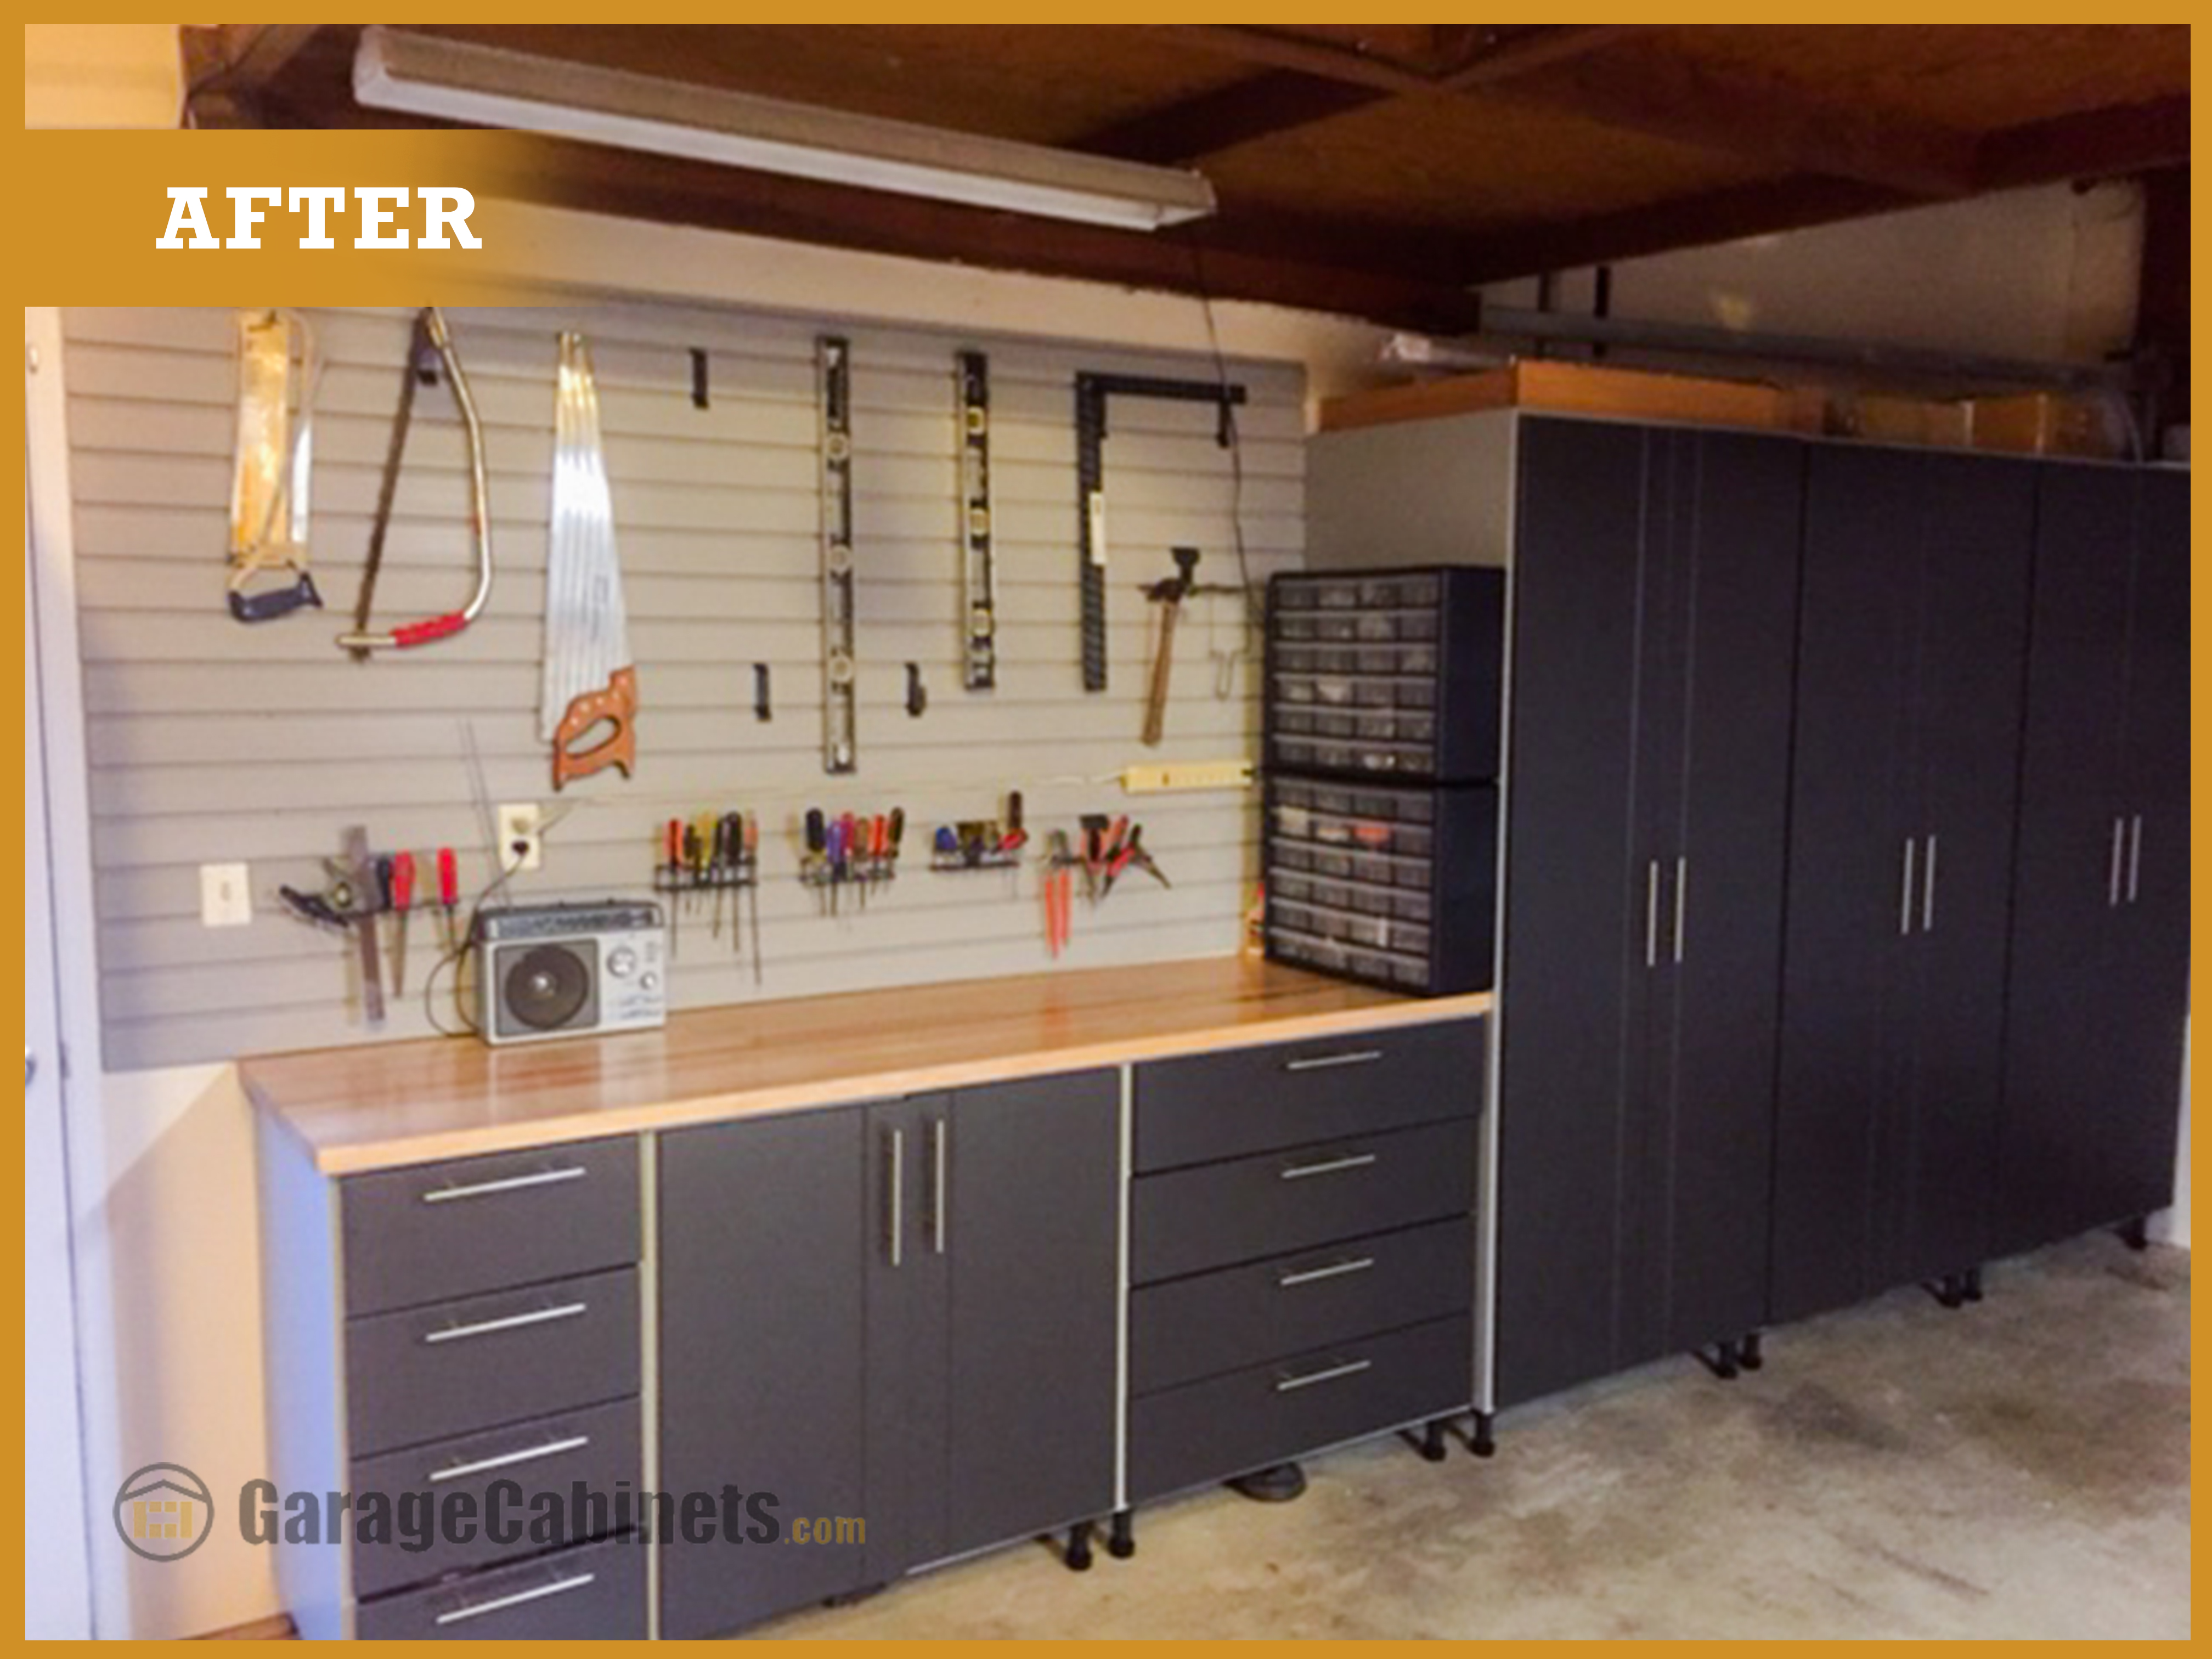 "After" Garage storage solution with slatwall and pewter garage cabinets.